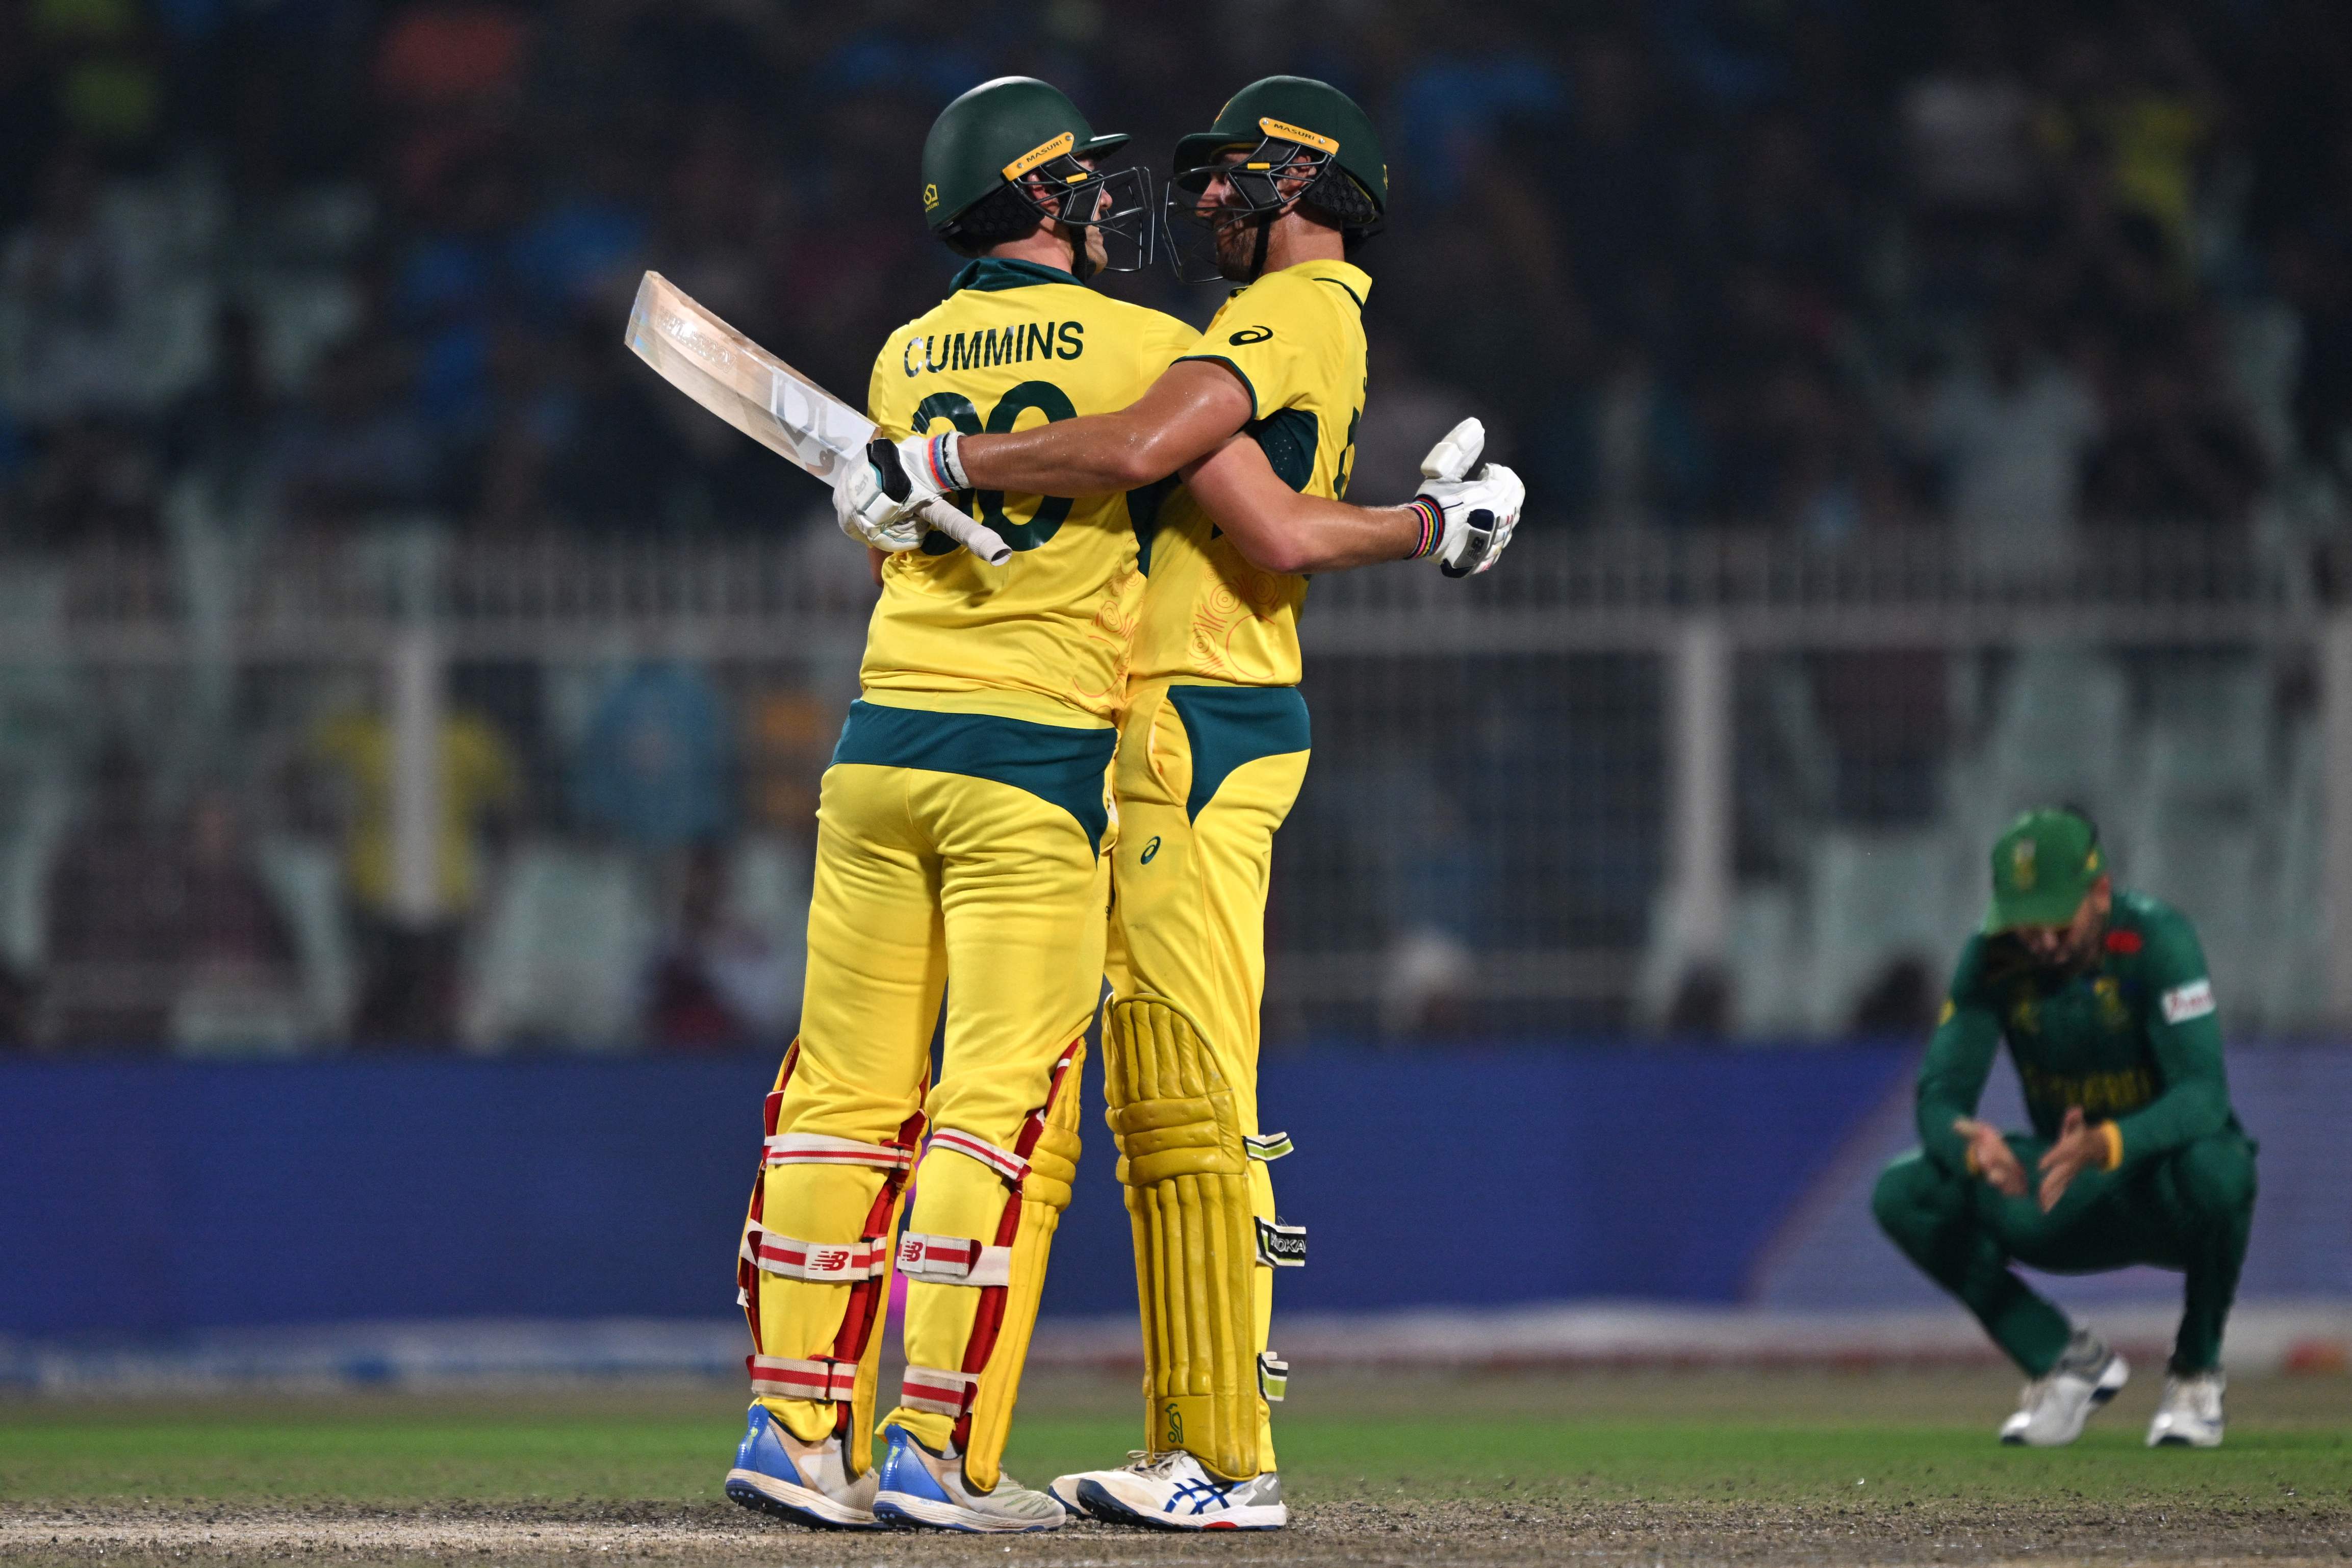 Australia beat South Africa by three wickets in the Cricket World Cup semi-final